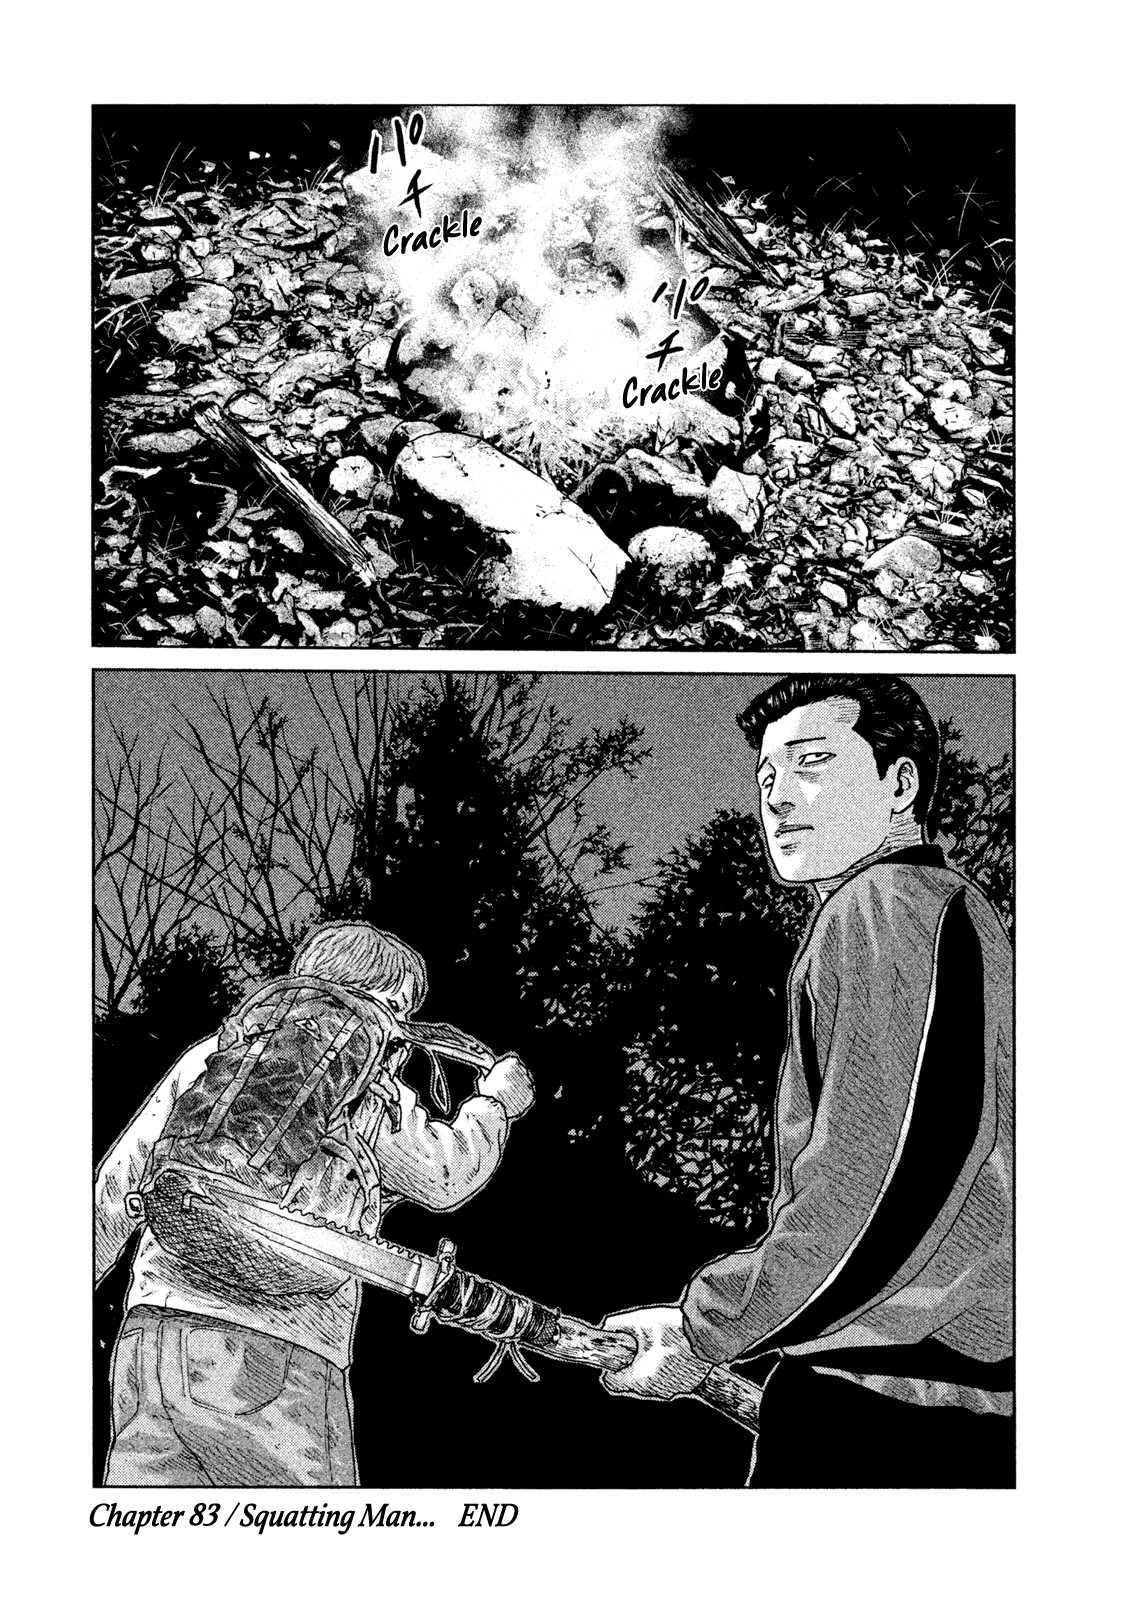 The Fable Vol. 8 Ch. 83 Squatting Man...